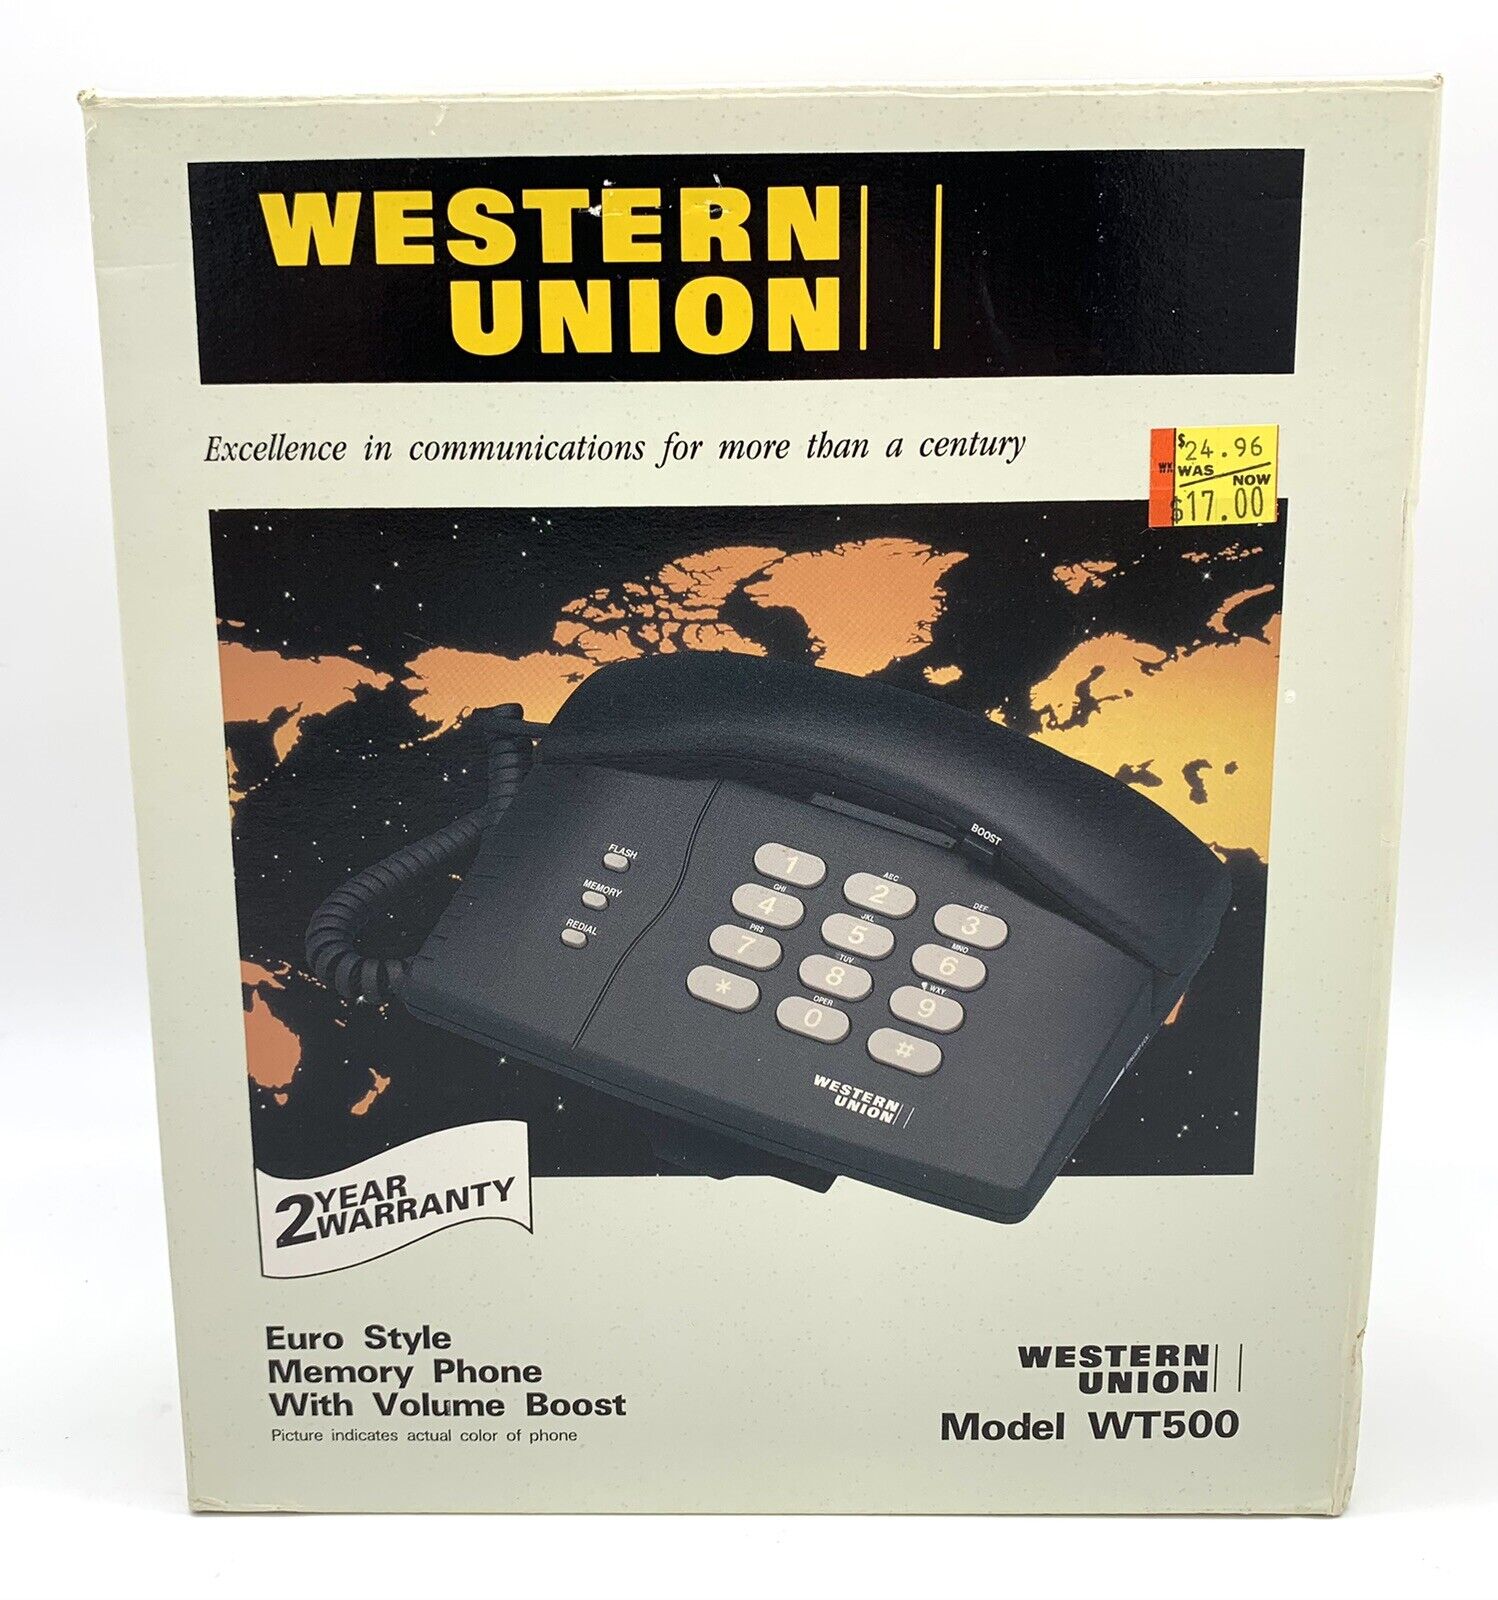 New Western Union Telephone WT500 Euro Style Memory Phone W/ Volume Boost NOS